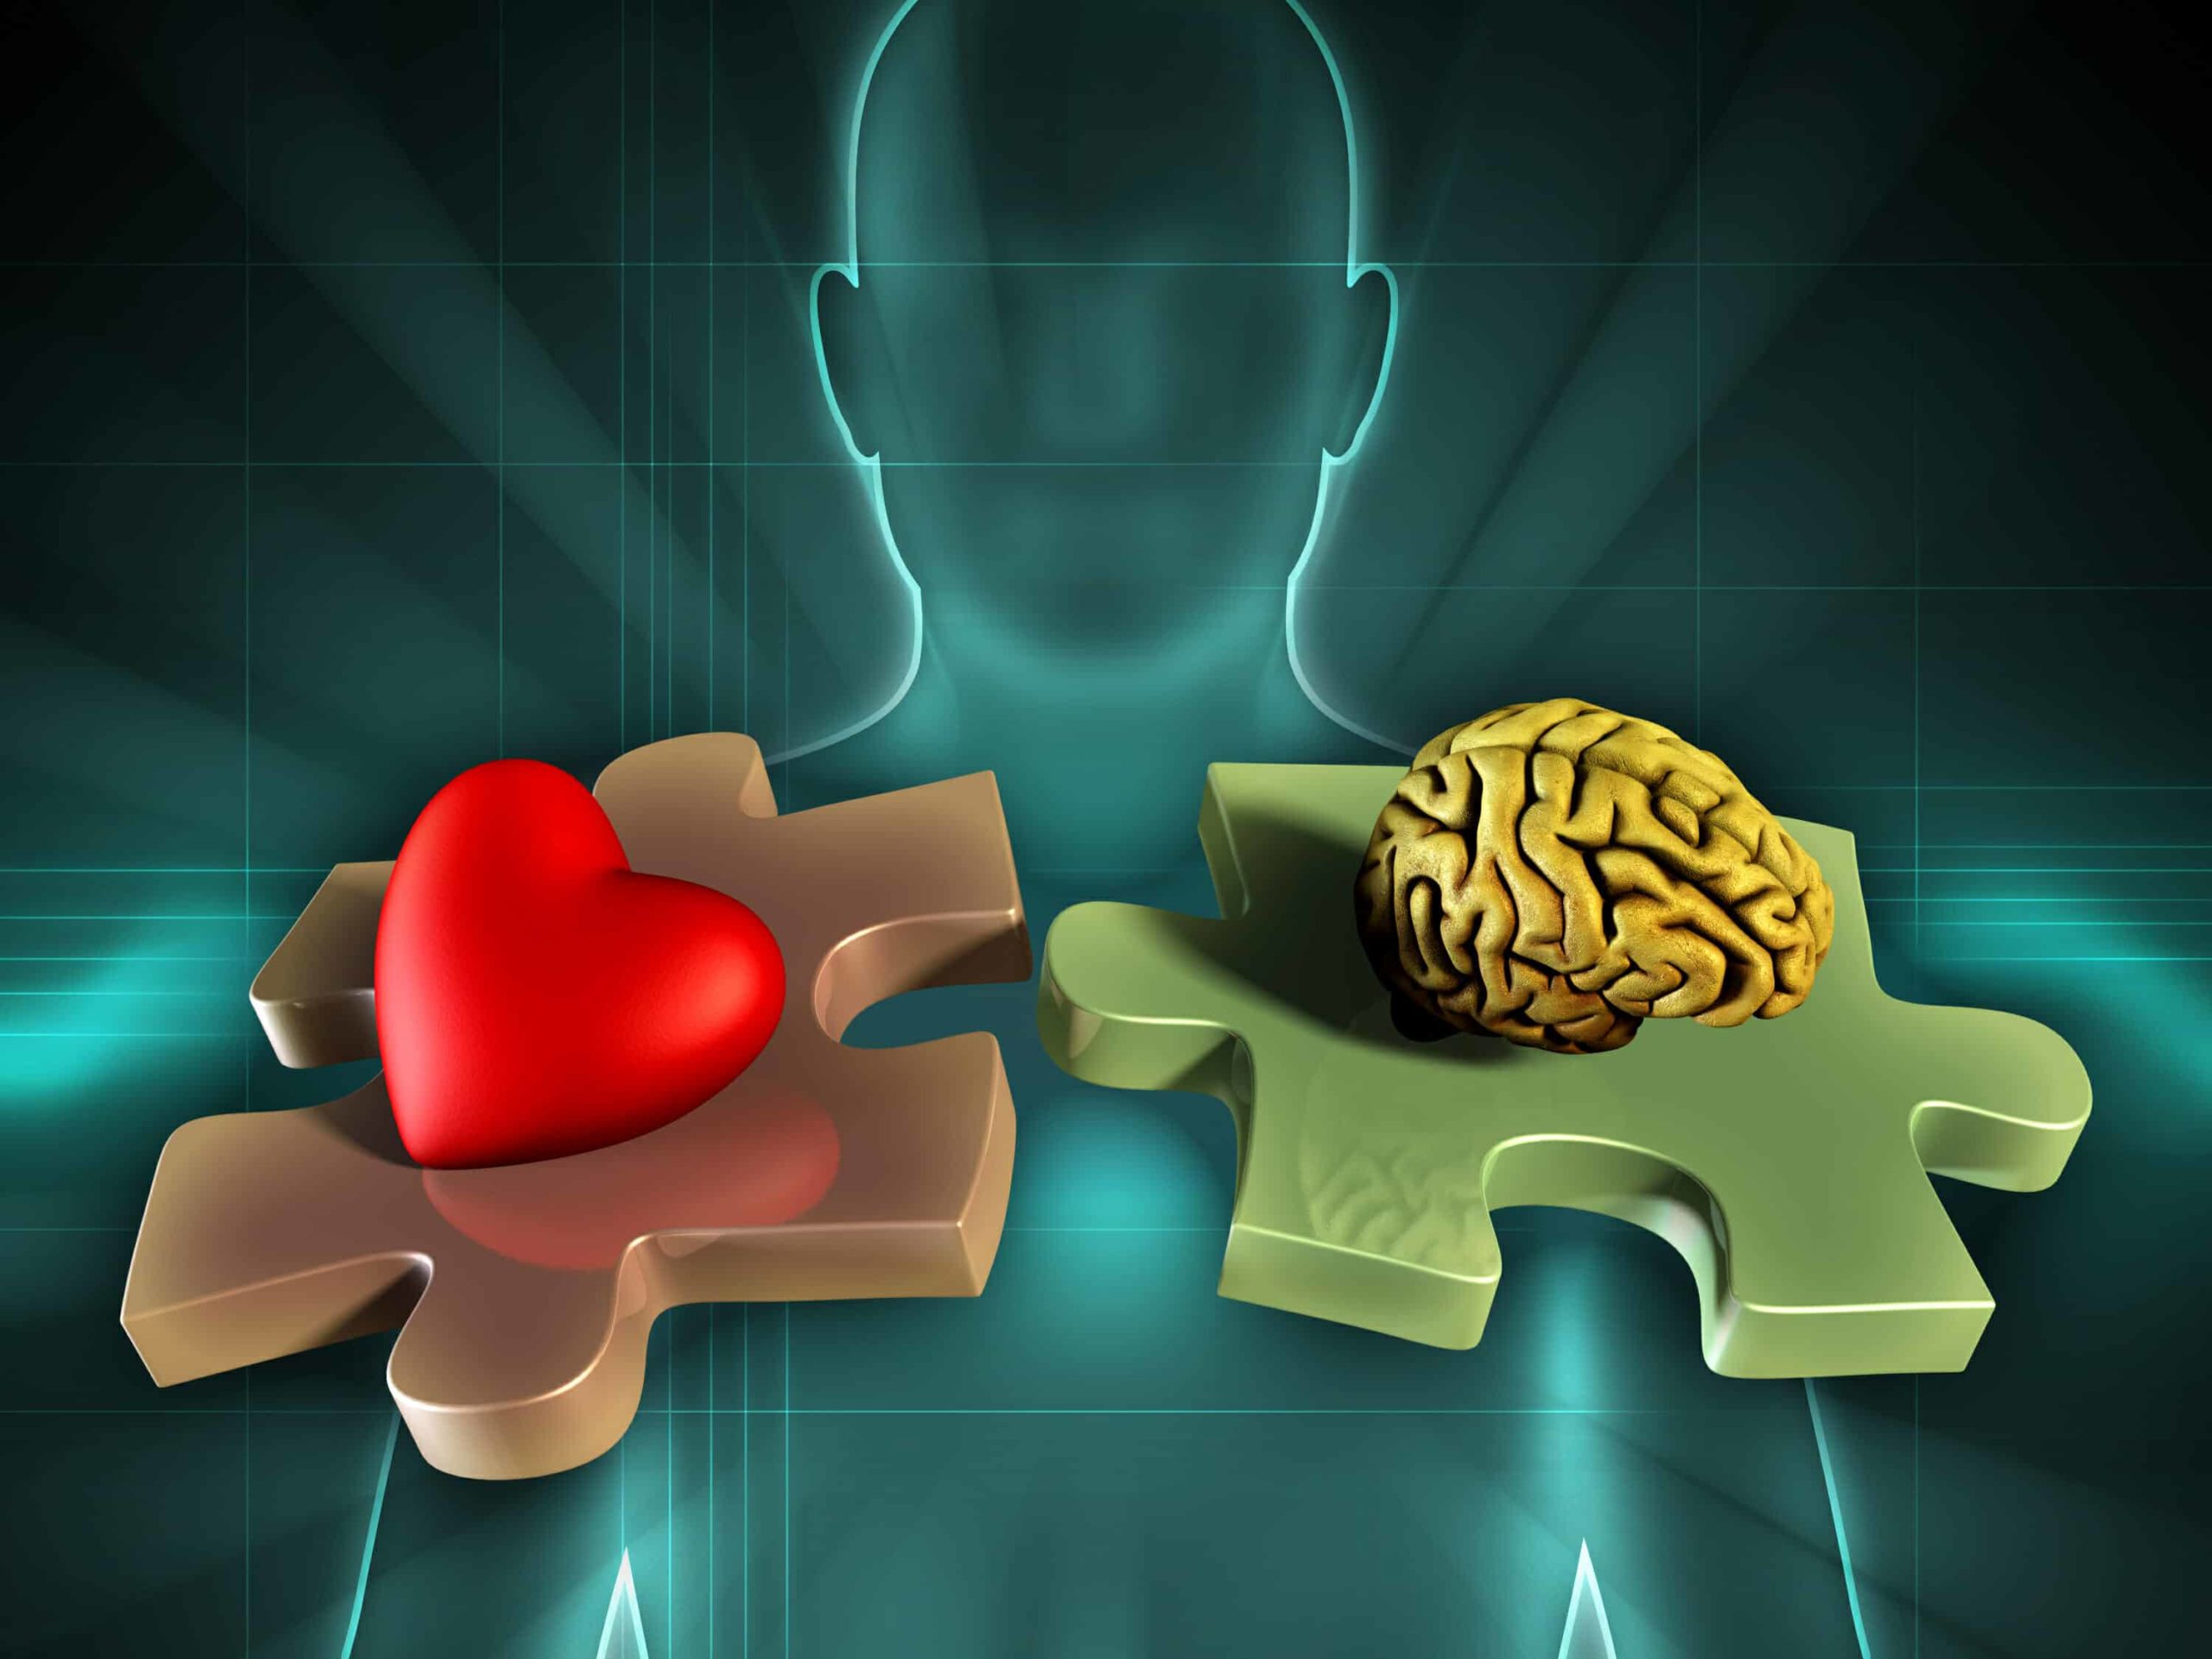 3D Depiction of a heart and a brain on puzzle pieces in front of a hologram of a man.